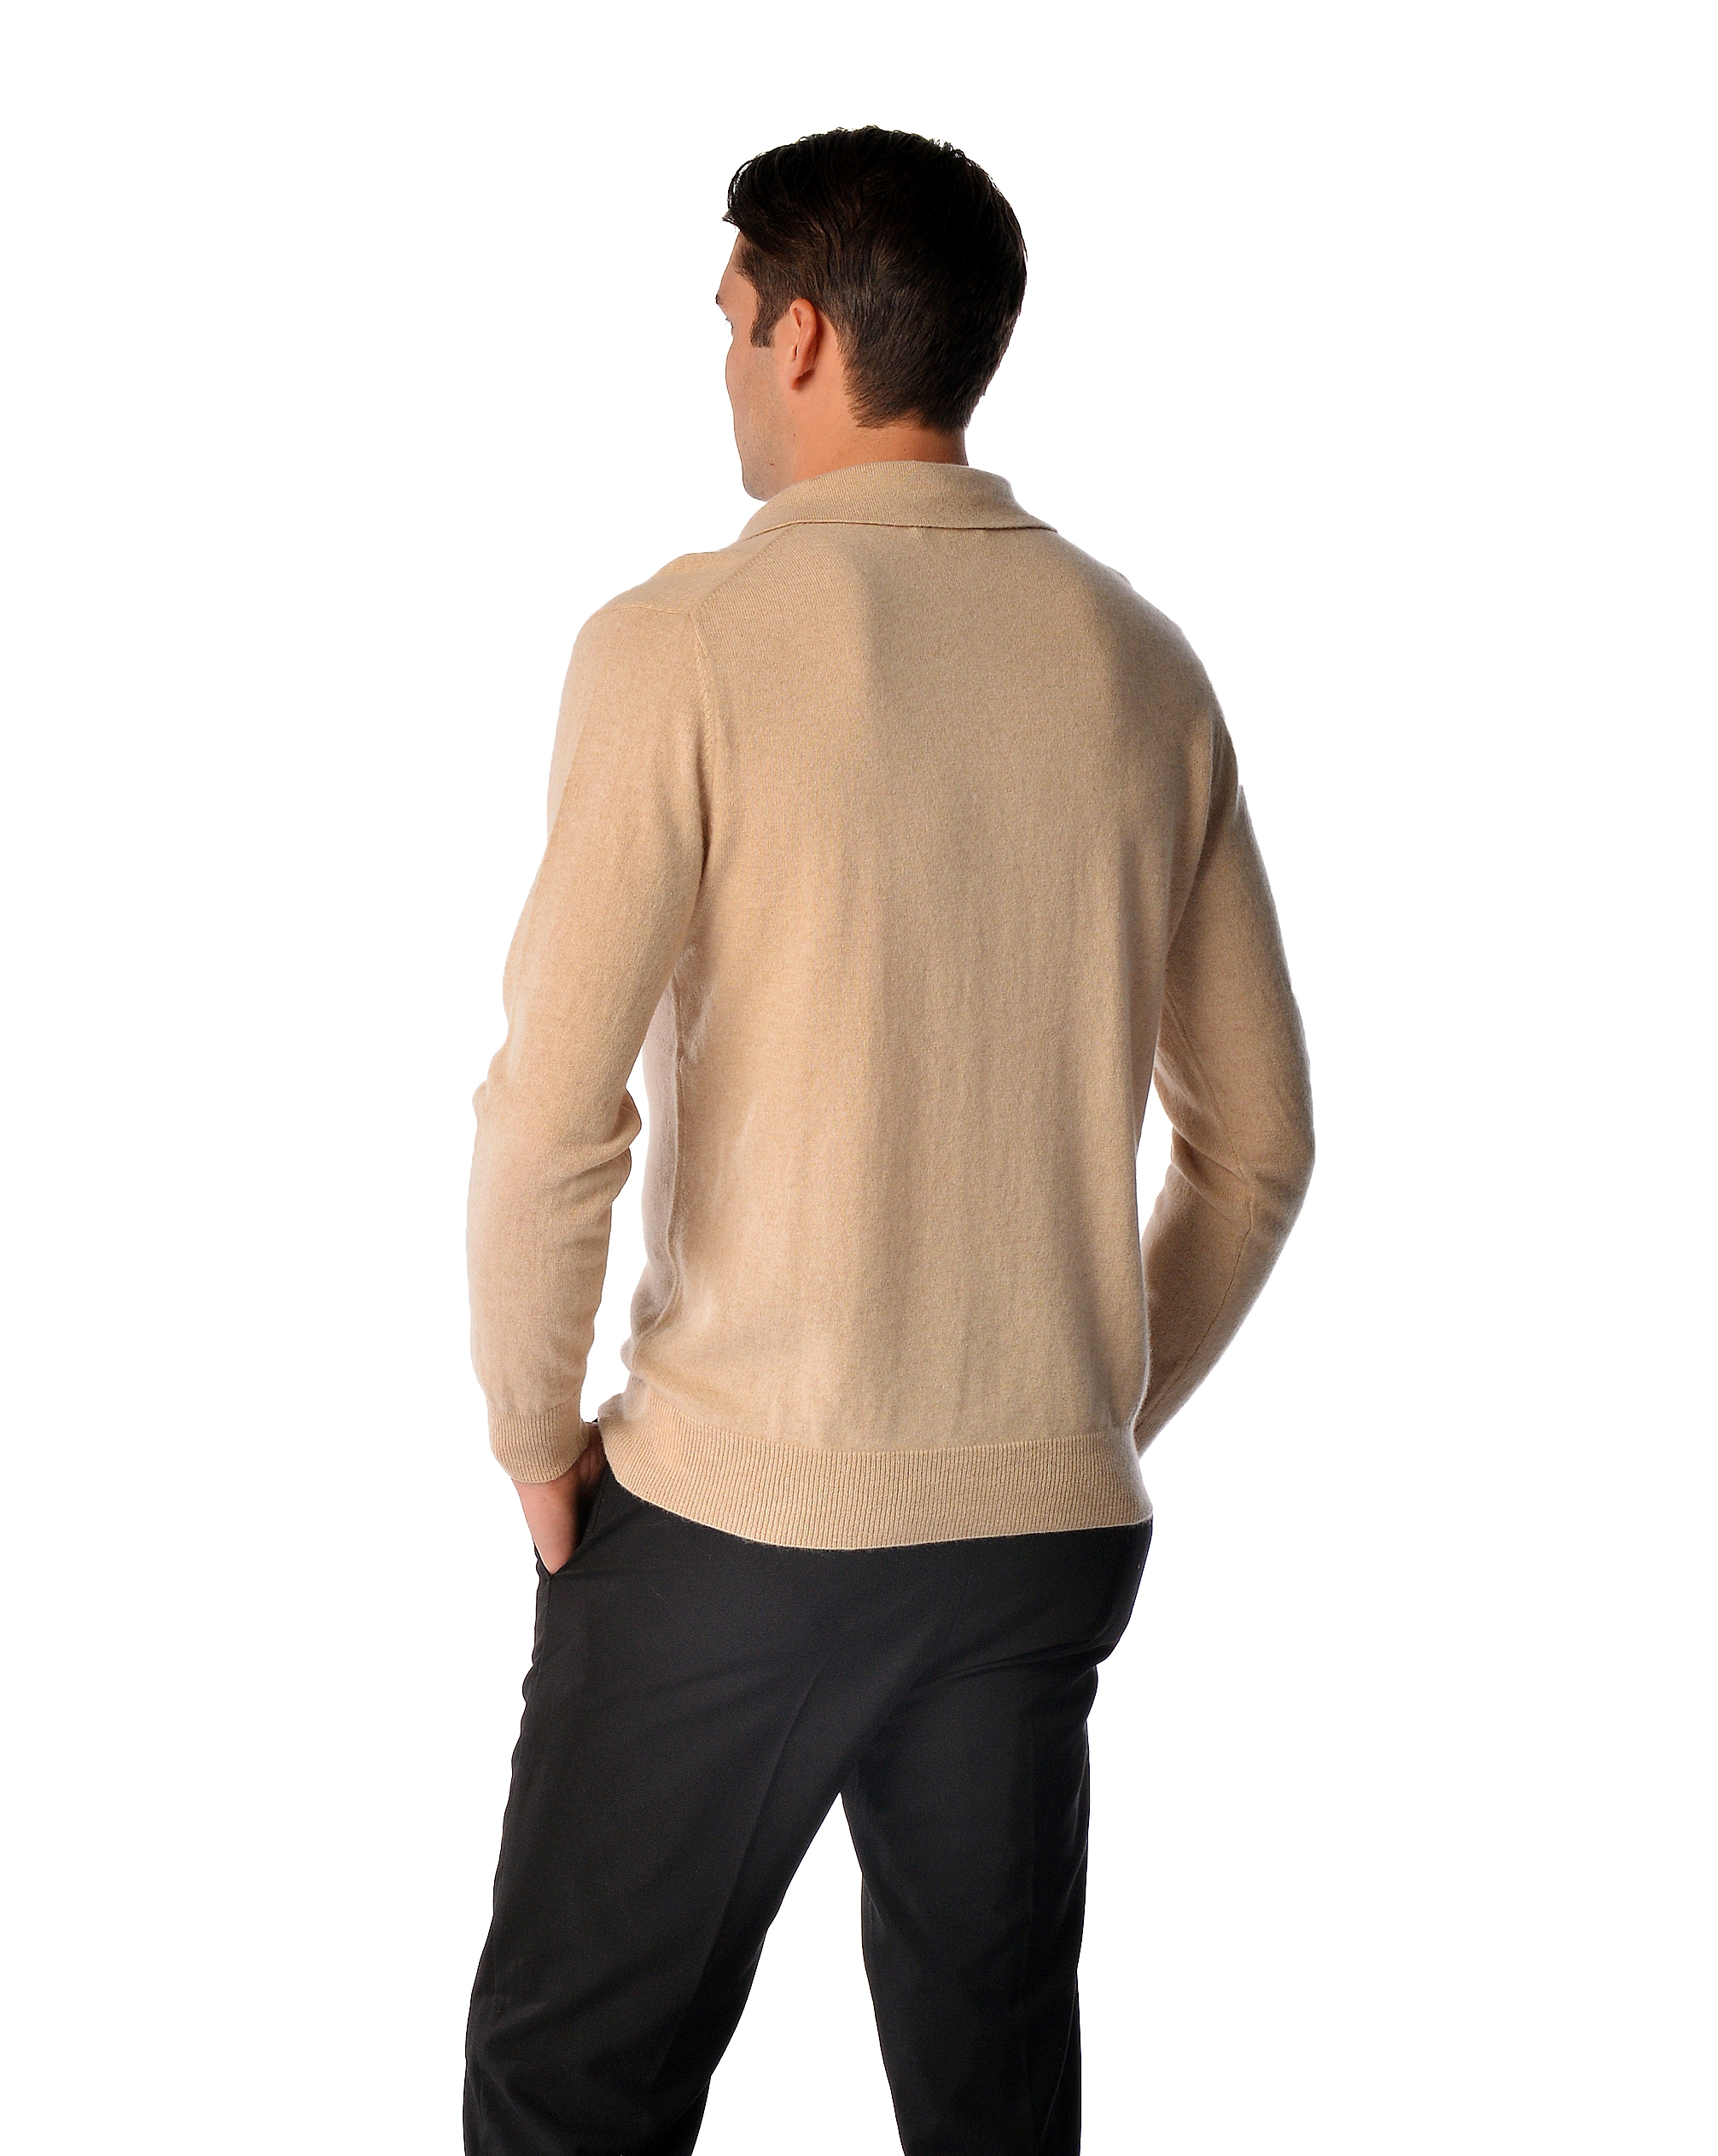 Men\'s Pure Cashmere Polo Sweater (Camel, Large)